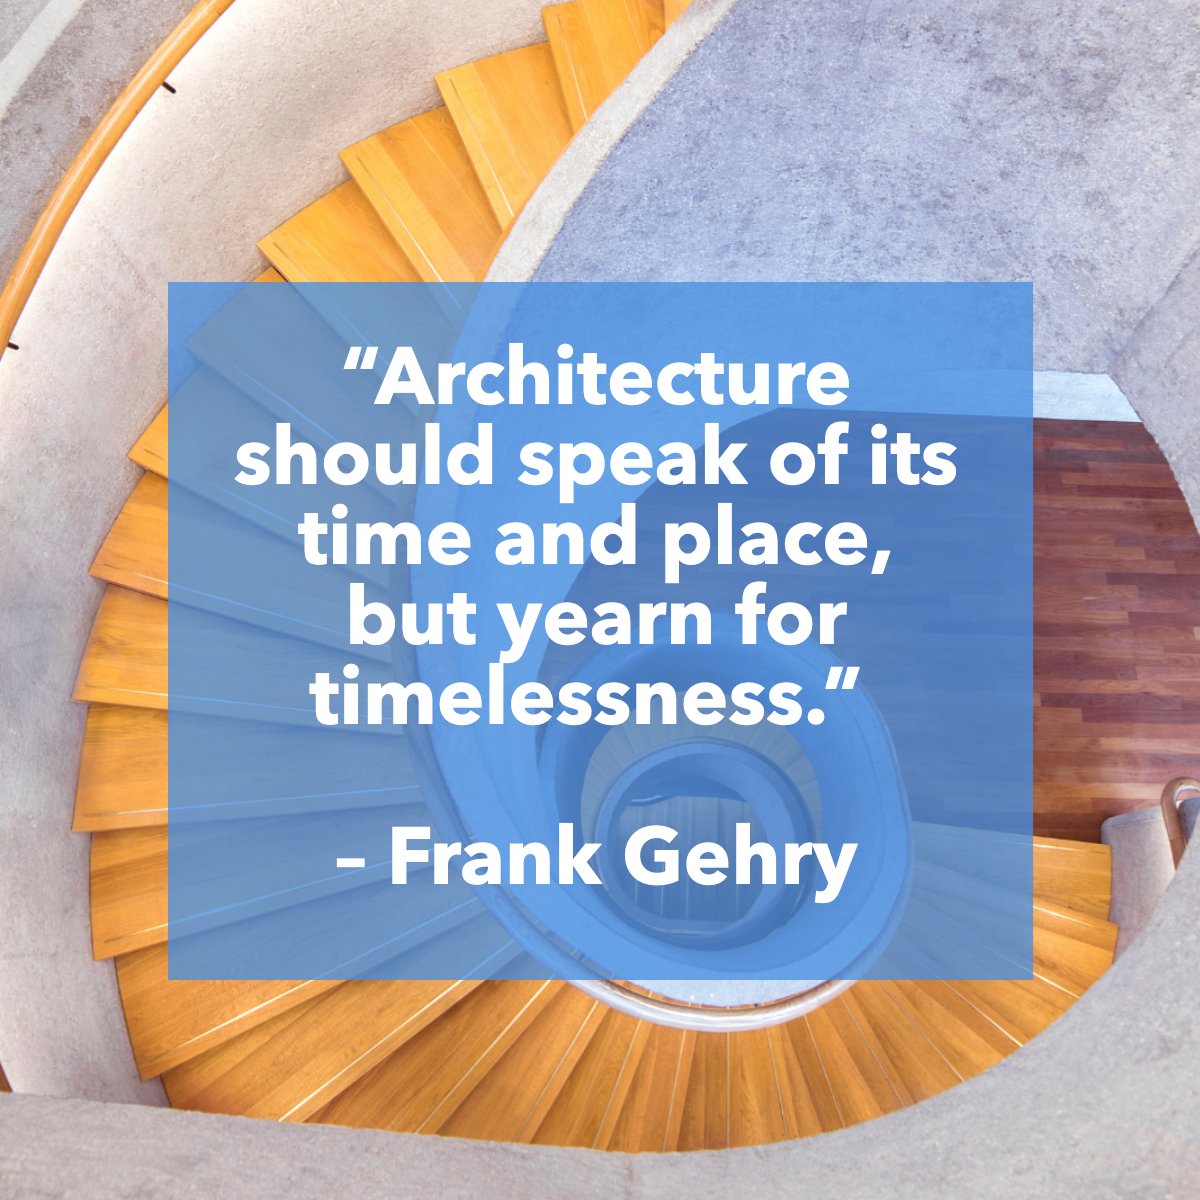 'Architecture should speak of its time and place, but yearn for timelessness.' 
― Frank Gehry 📖

#spiralstaircase #stairs #design #architecture #frankgehry #quoteoftheday
 #DebbieRettbergSells #TheKeyTeamNorthrop